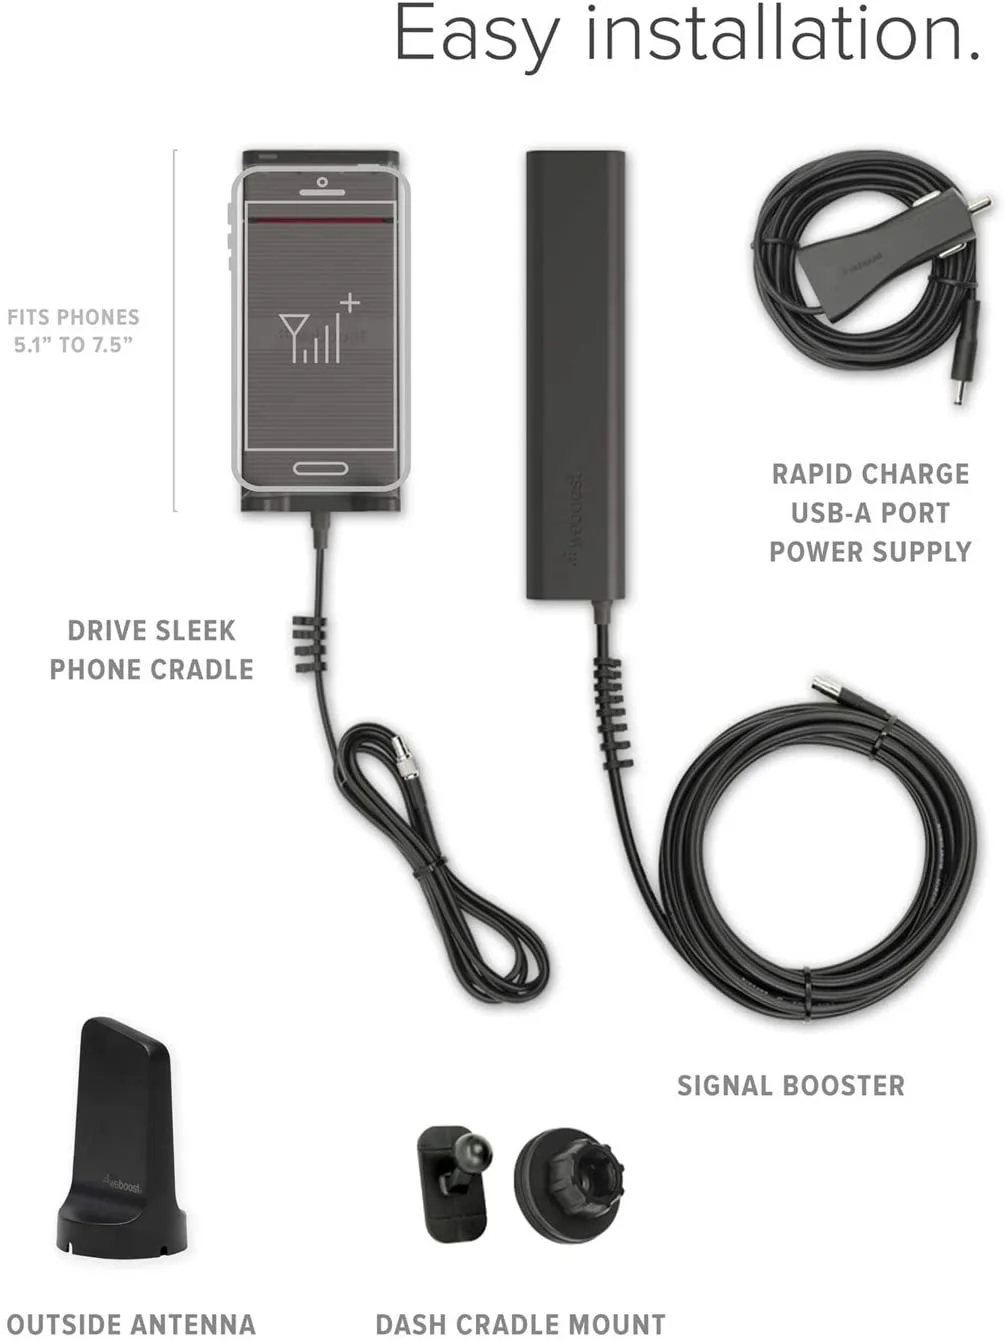 The WeBoost Drive Sleek RV cell booster parts